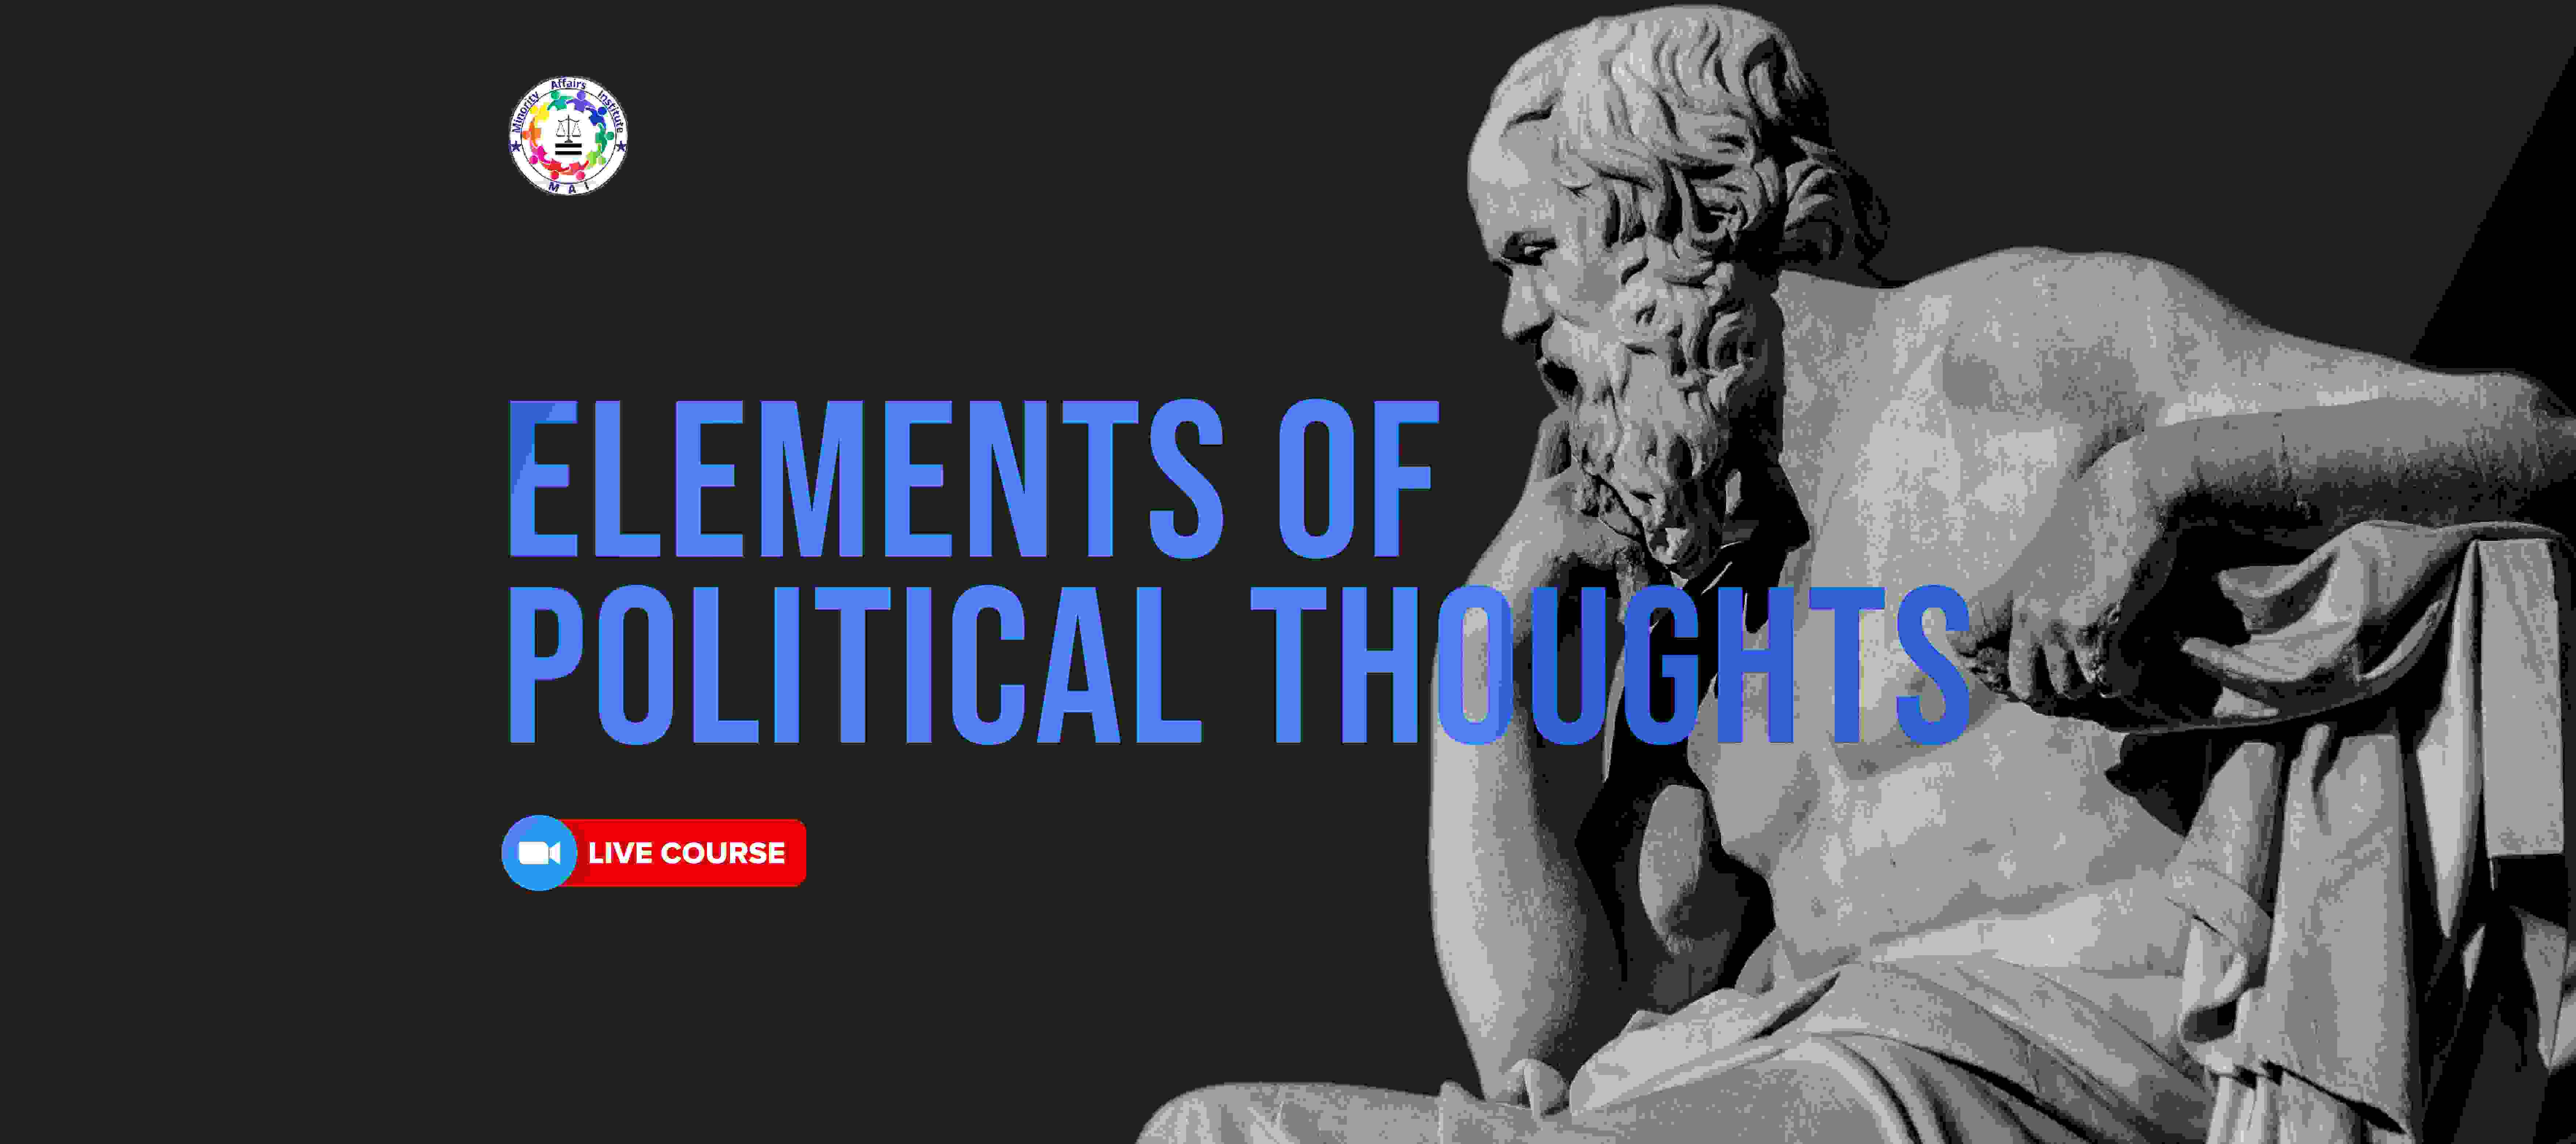 Elements of Political Thoughts MAI001